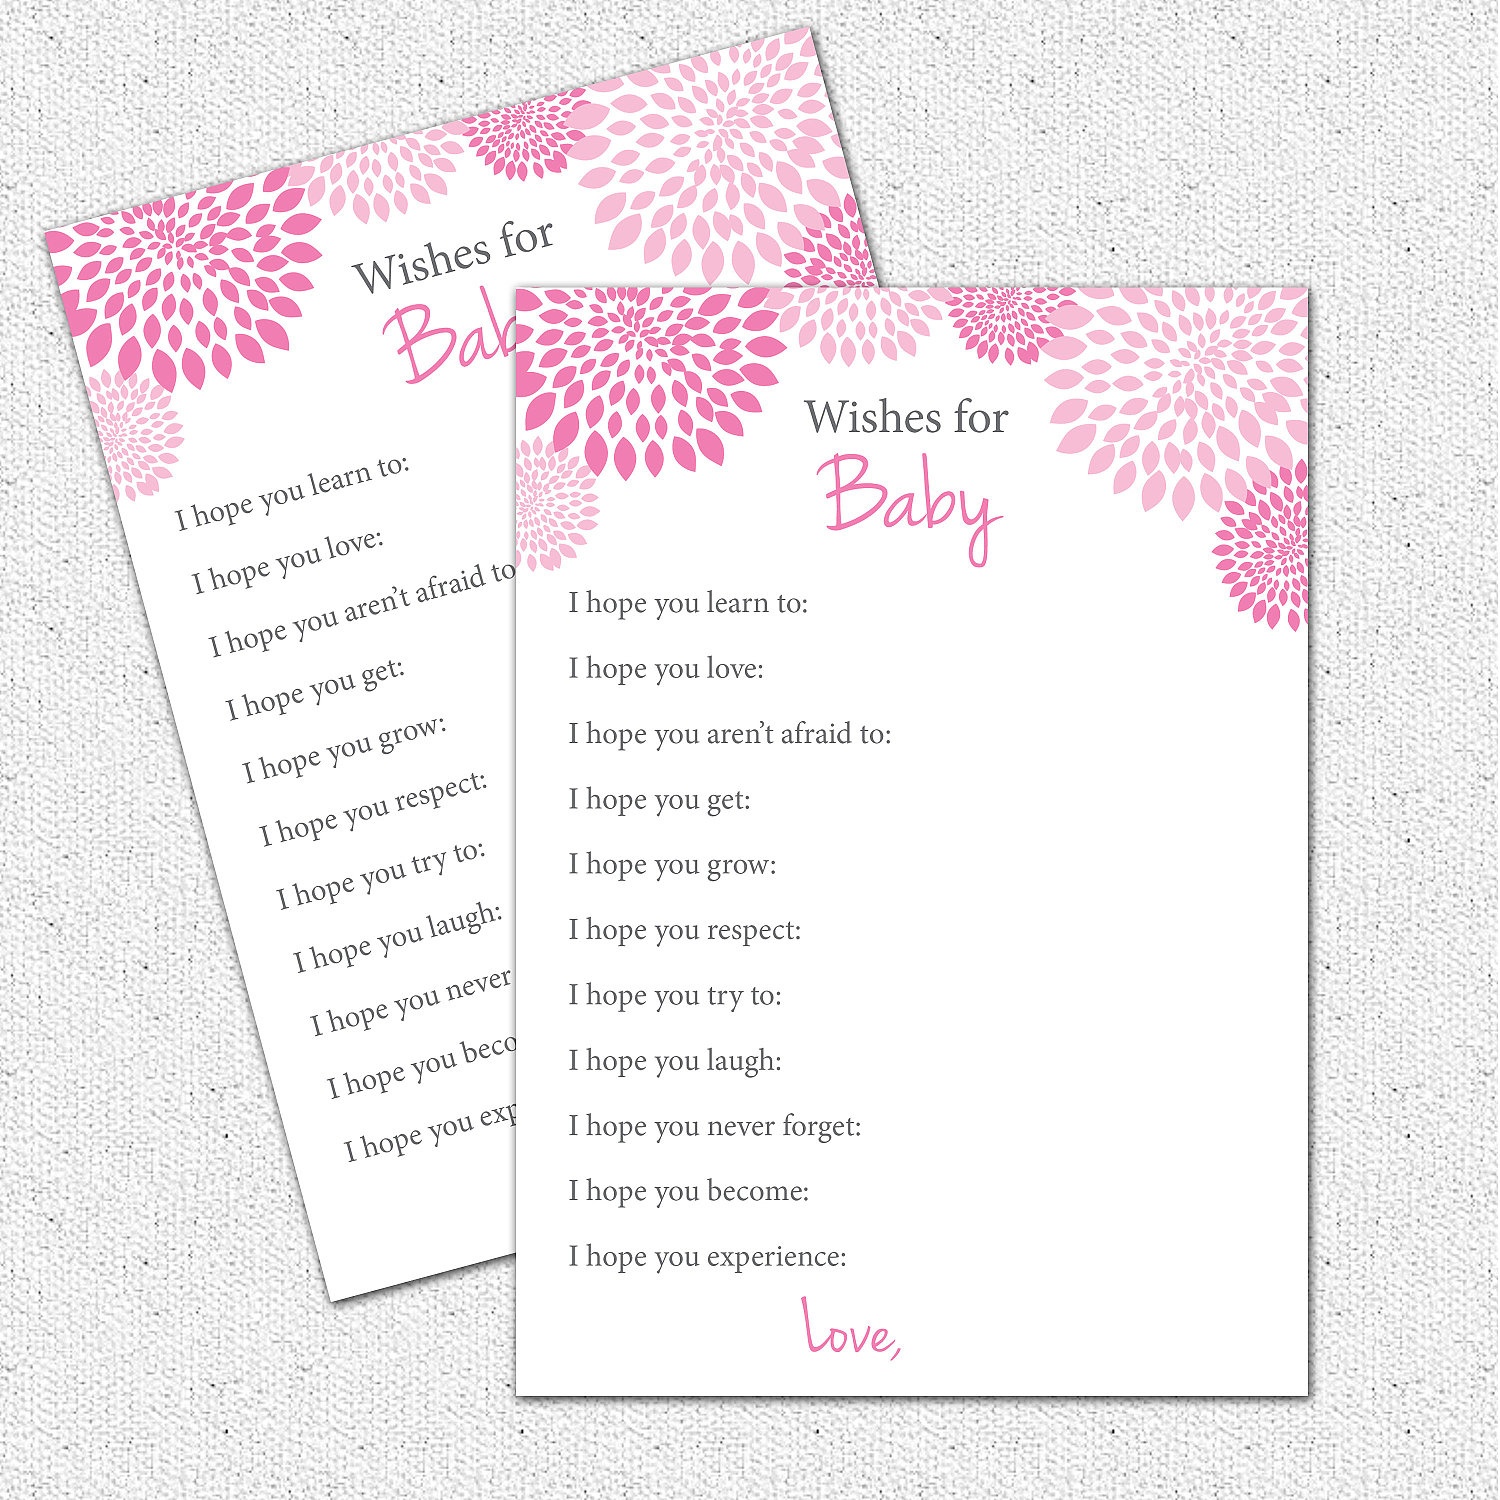 Photo : Well Wishes I Hope Image - Free Printable Templates For Baby Shower Games